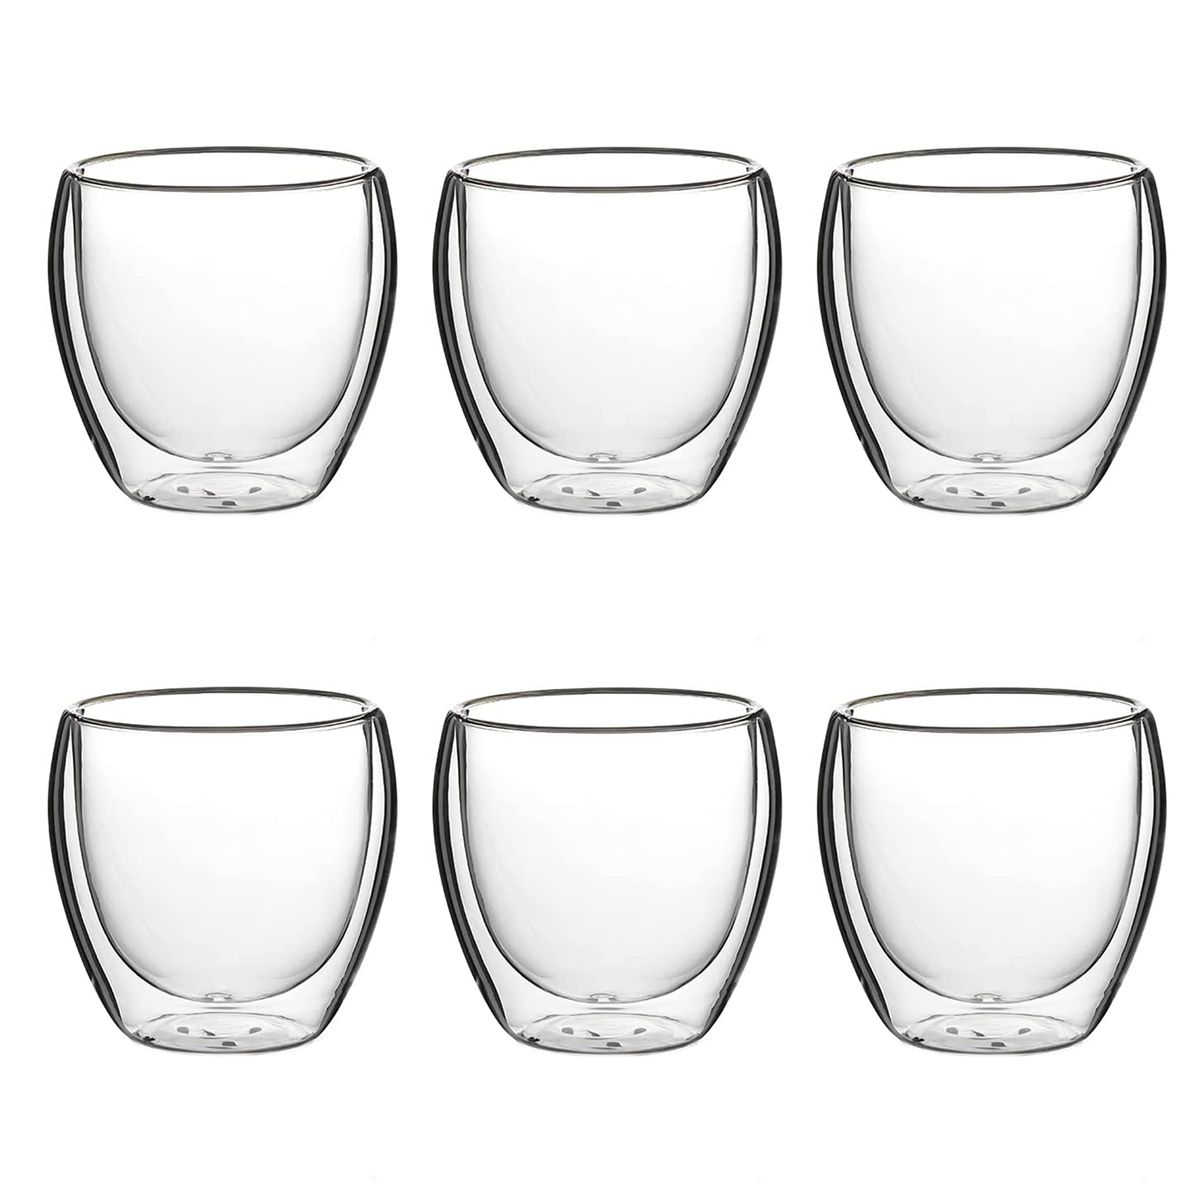 Double Wall Insulated Glass Cappuccino Cups 8.5oz - Set of 6